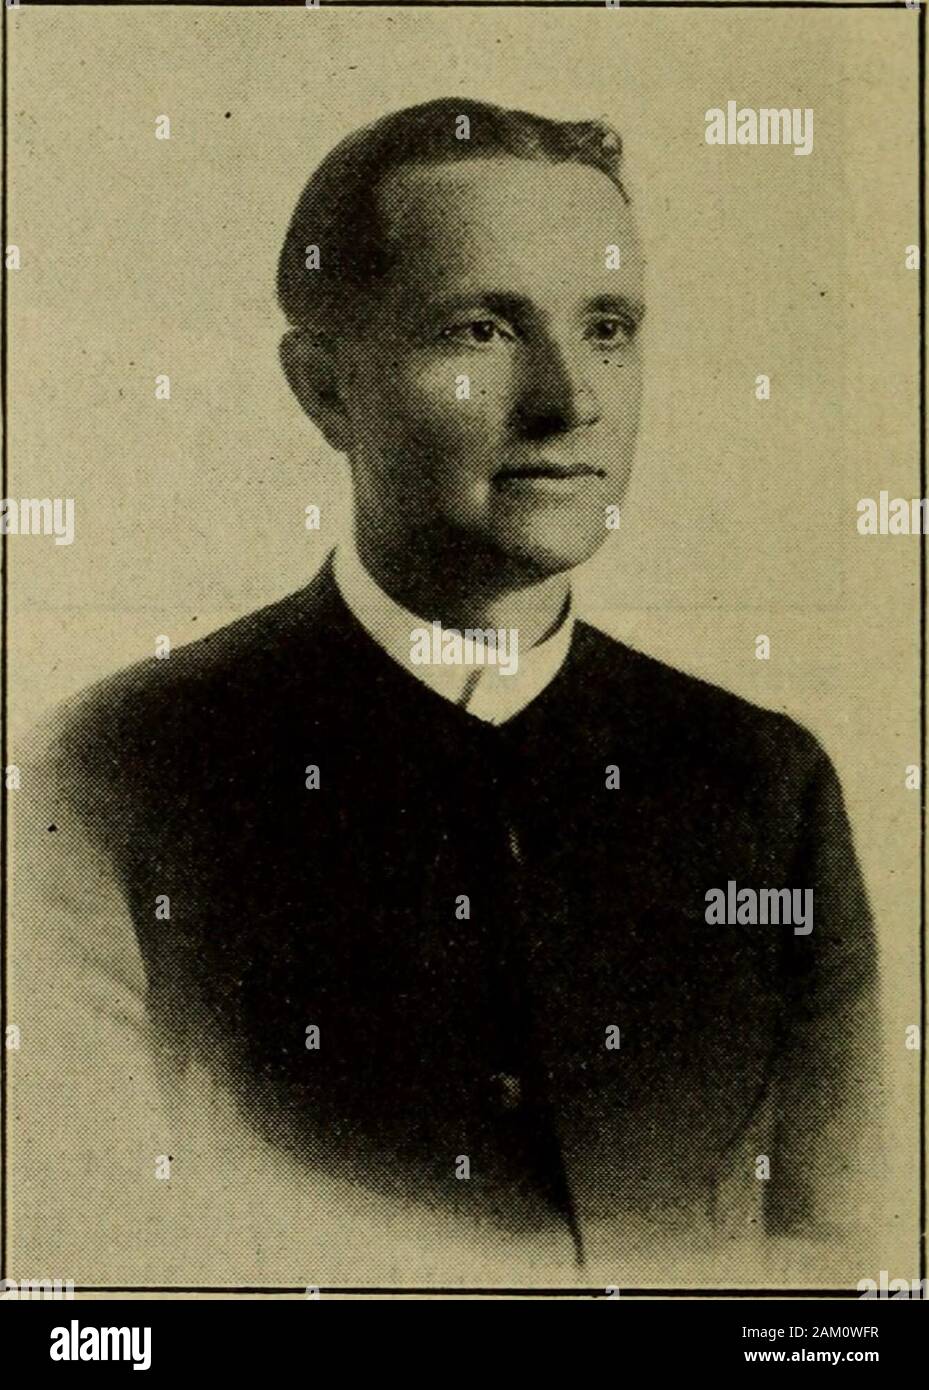 Missionary Visitor, The (1912) . he namesof the brethren who served as a com-mittee at the time the organization waseffected are not known. The chartermembers were eight in number: Dan-iel Kuns and wife, Leonard Blicken-staff and wife, Mr. Stuckey, Miss Baer,and Jonas Wolfe and wife. The firstmembers to immigrate were Peter Rep-logle and wife, who came in September,1857. The first official body was JohnMetzger, bishop; Leonard Blickenstaff,second degree; Jonas Wolfe, deacon.At the time Bro. Metzger was chosenoverseer he lived in Edna Mills, CarrollCo., Ind. Distance, however, did notinterfere Stock Photo